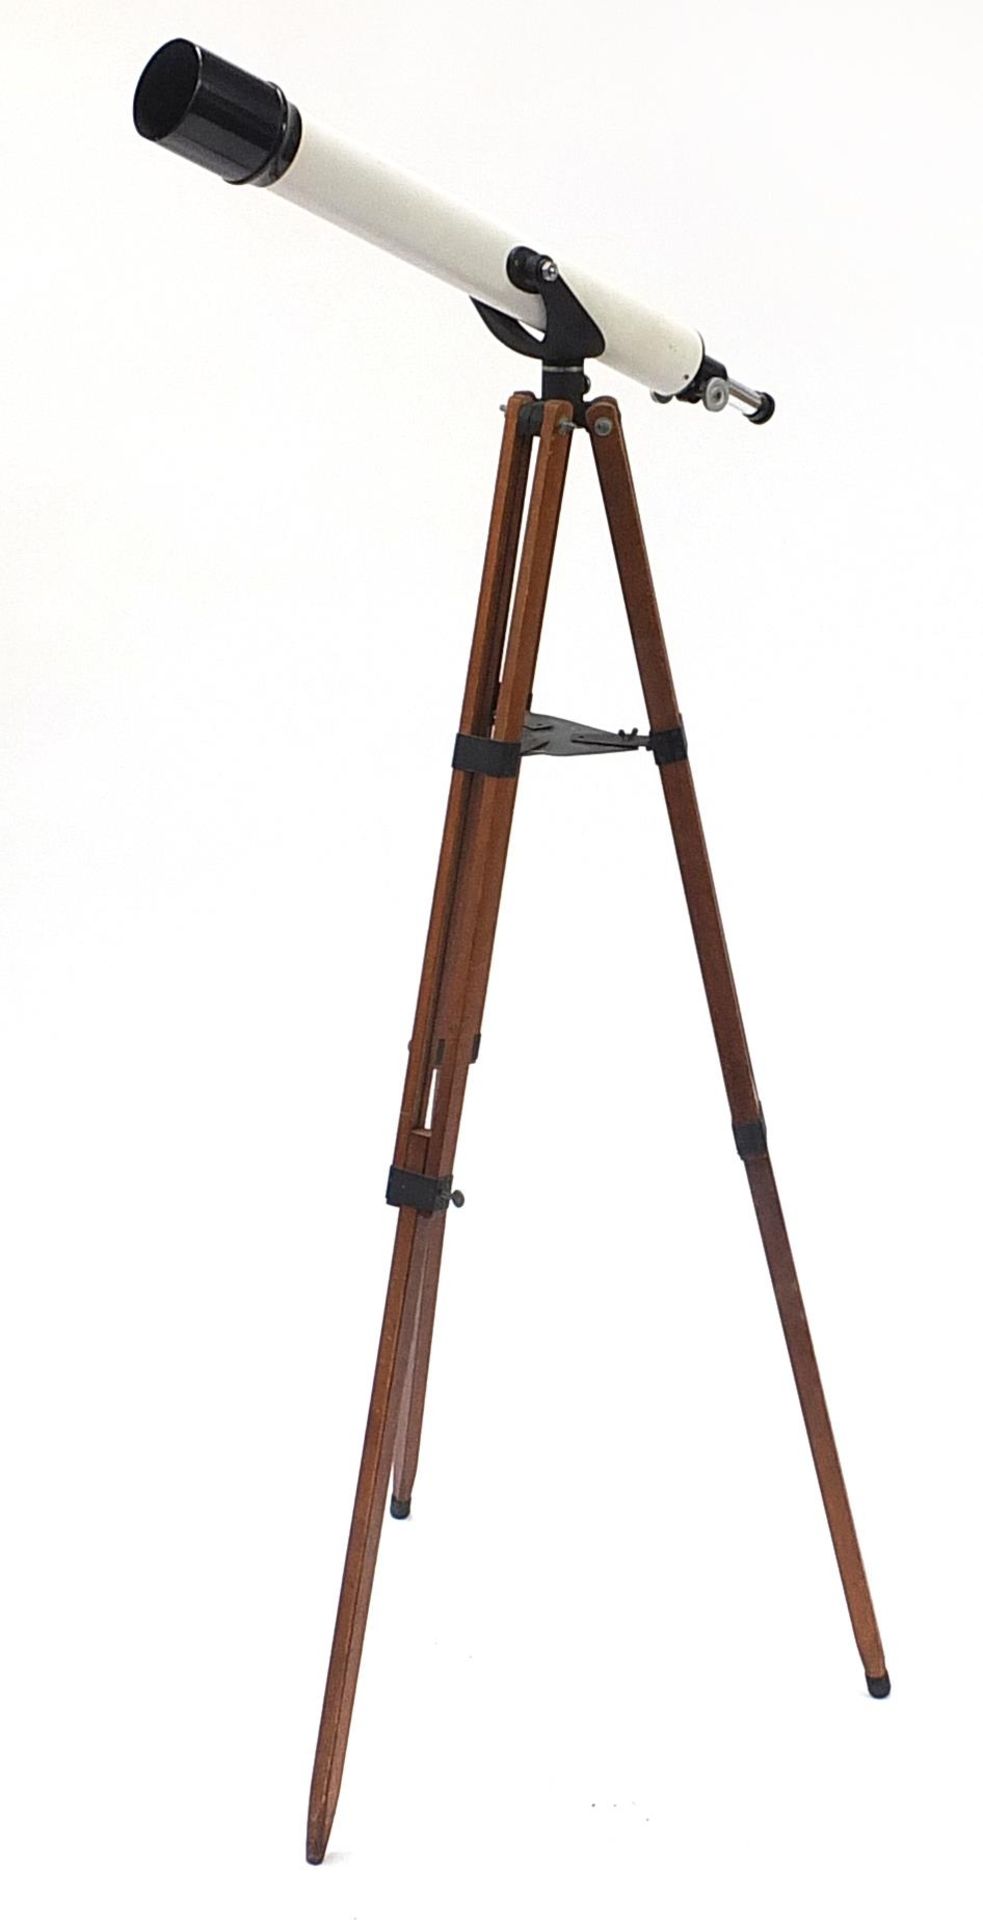 Unnamed telescope mounted on a military style adjustable tripod stand